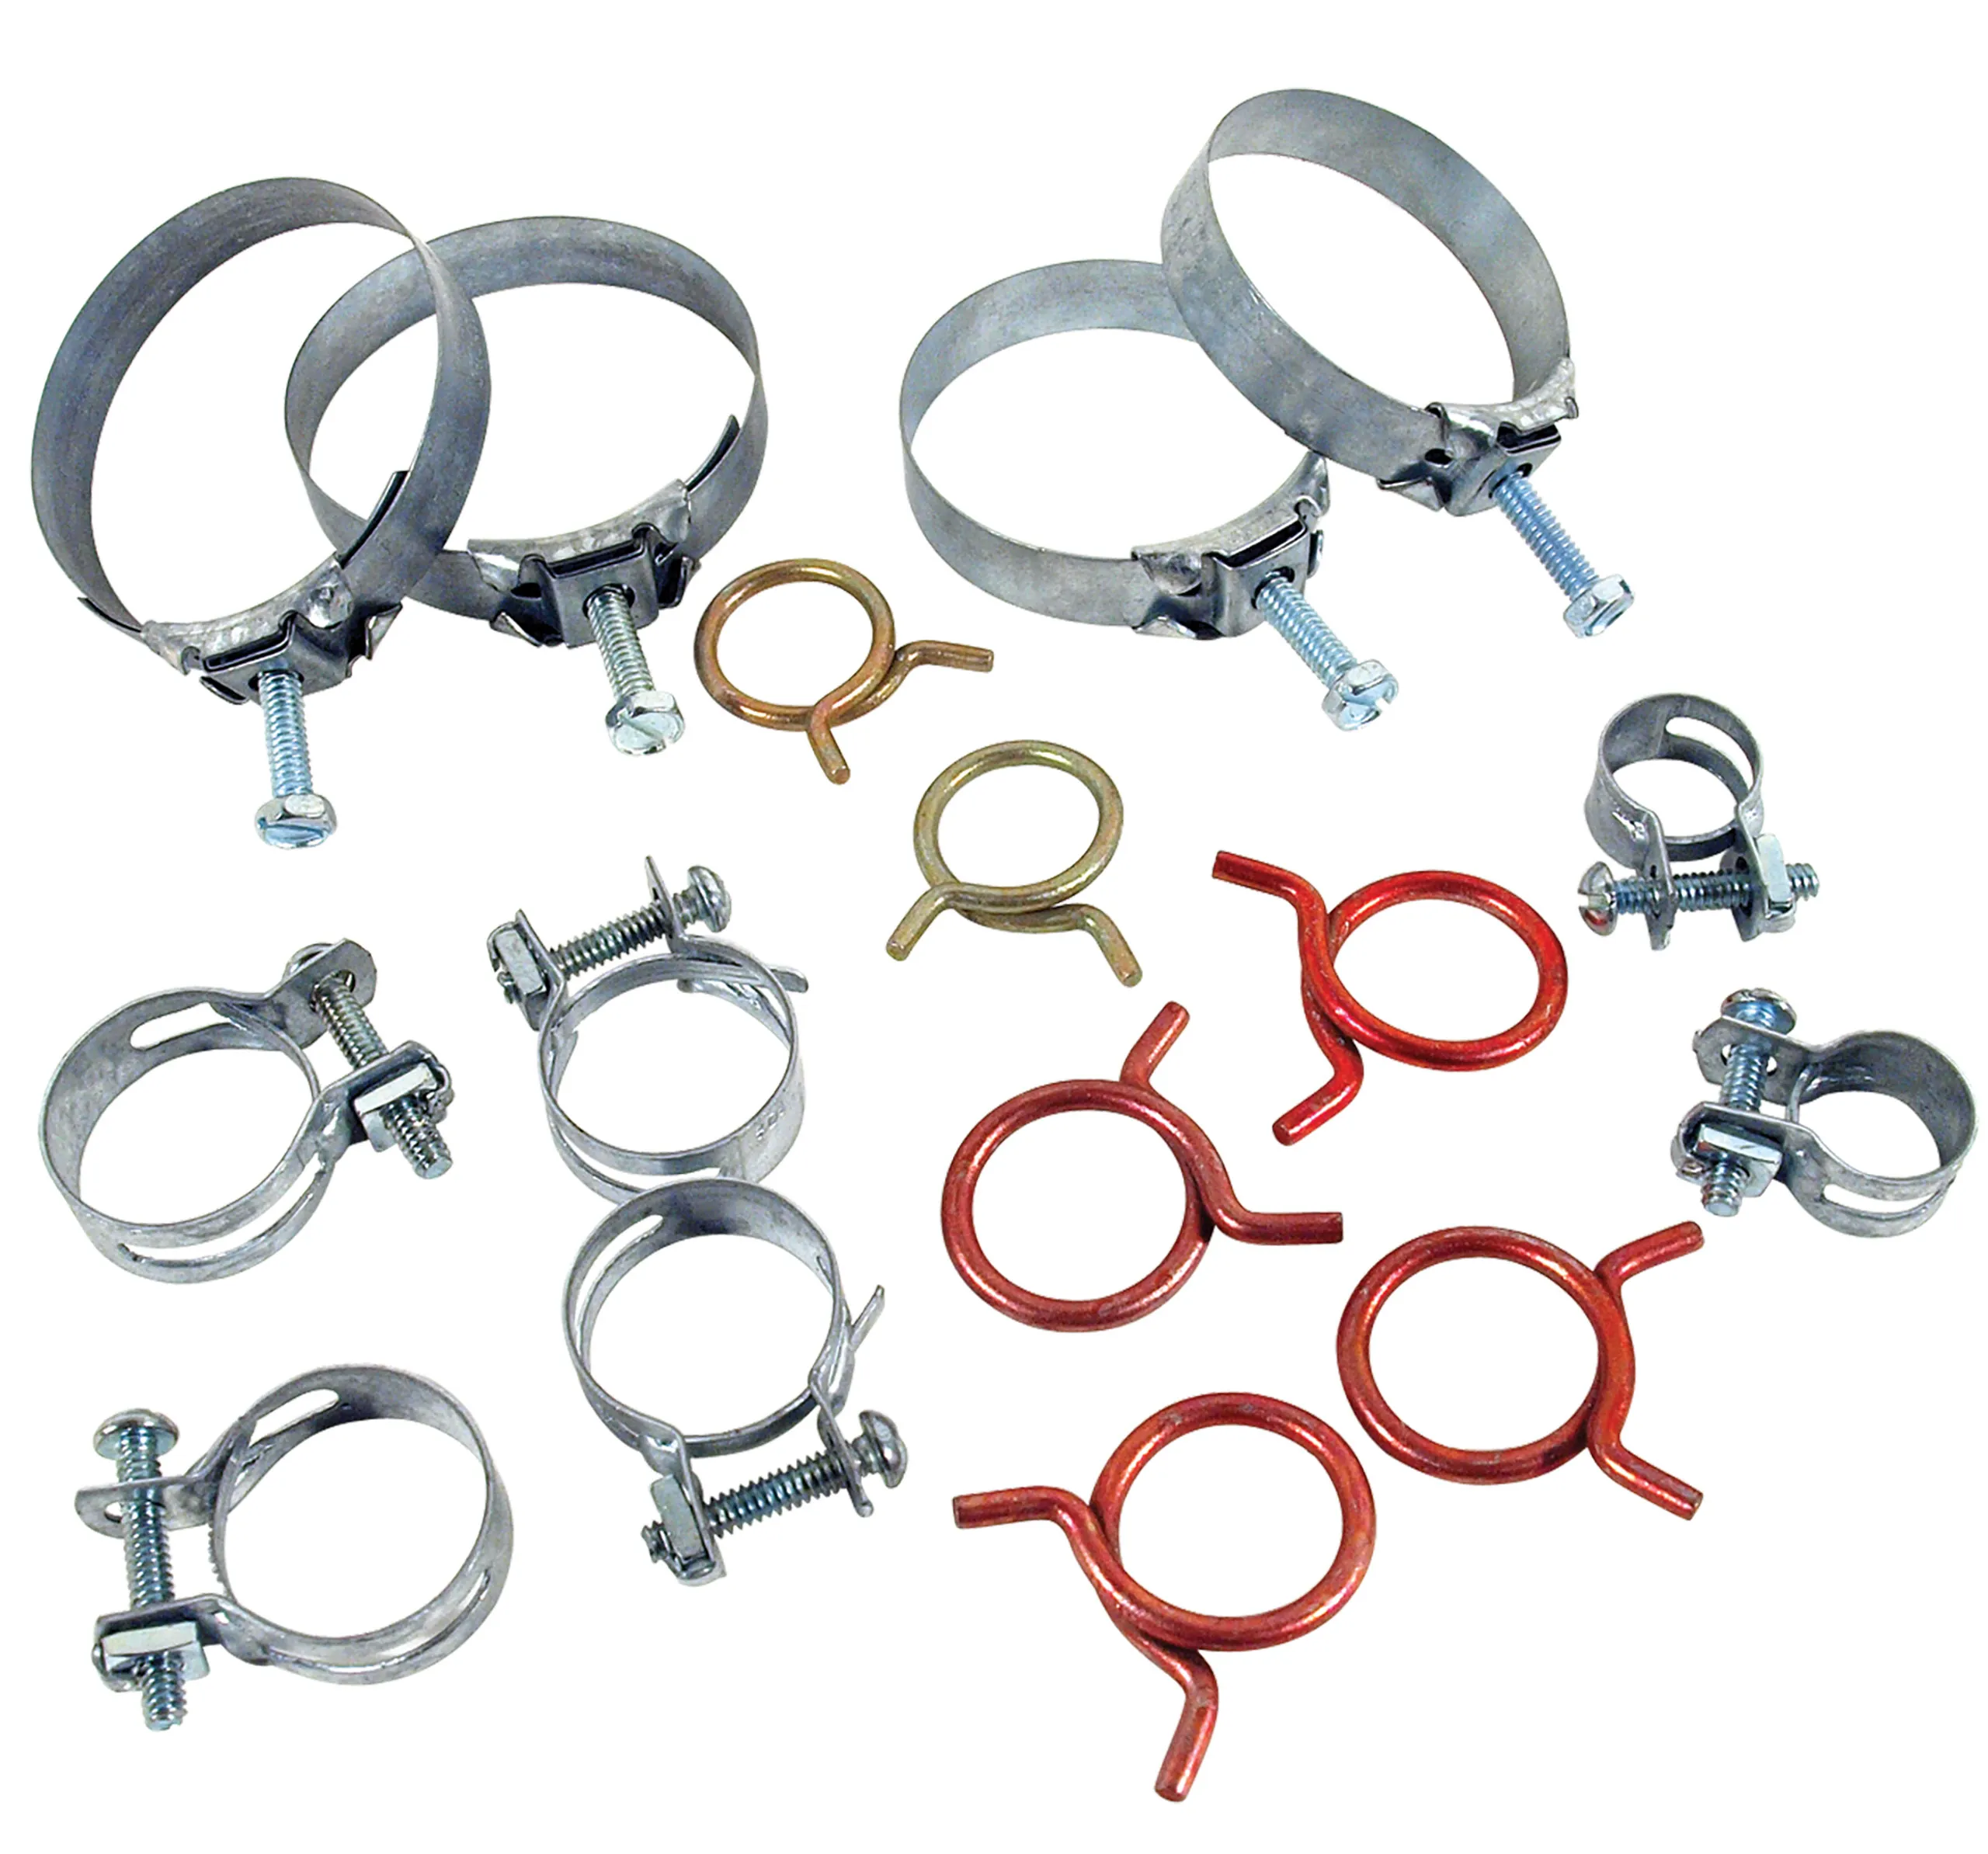 C2 1963-1967 Chevrolet Corvette Hose Clamp Kit. 327 High Performance W/O Air Conditioning - Auto Accessories of America